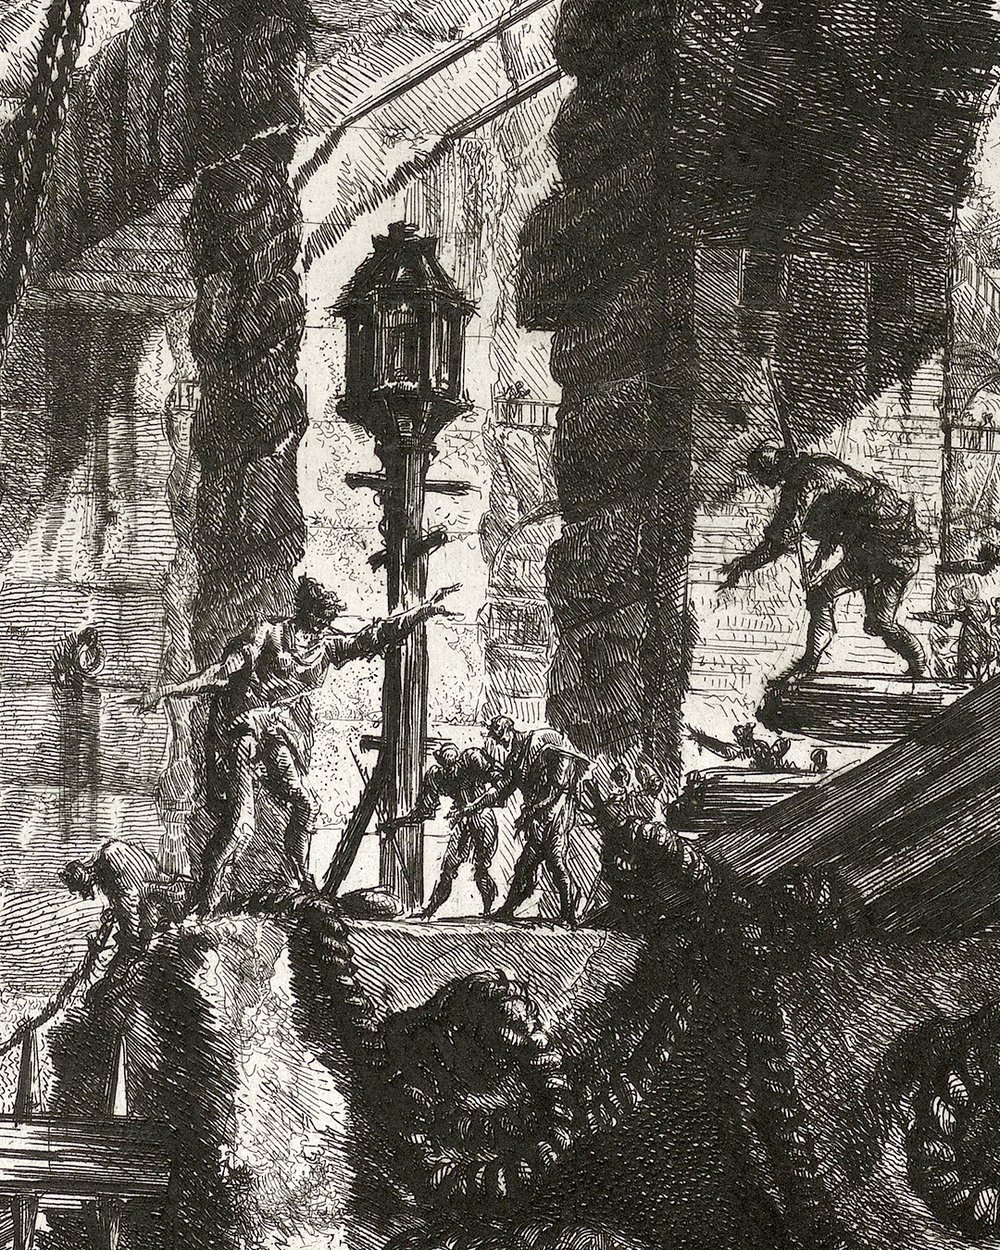 ''Dungeon with stone reliefs with lions'' (1761)